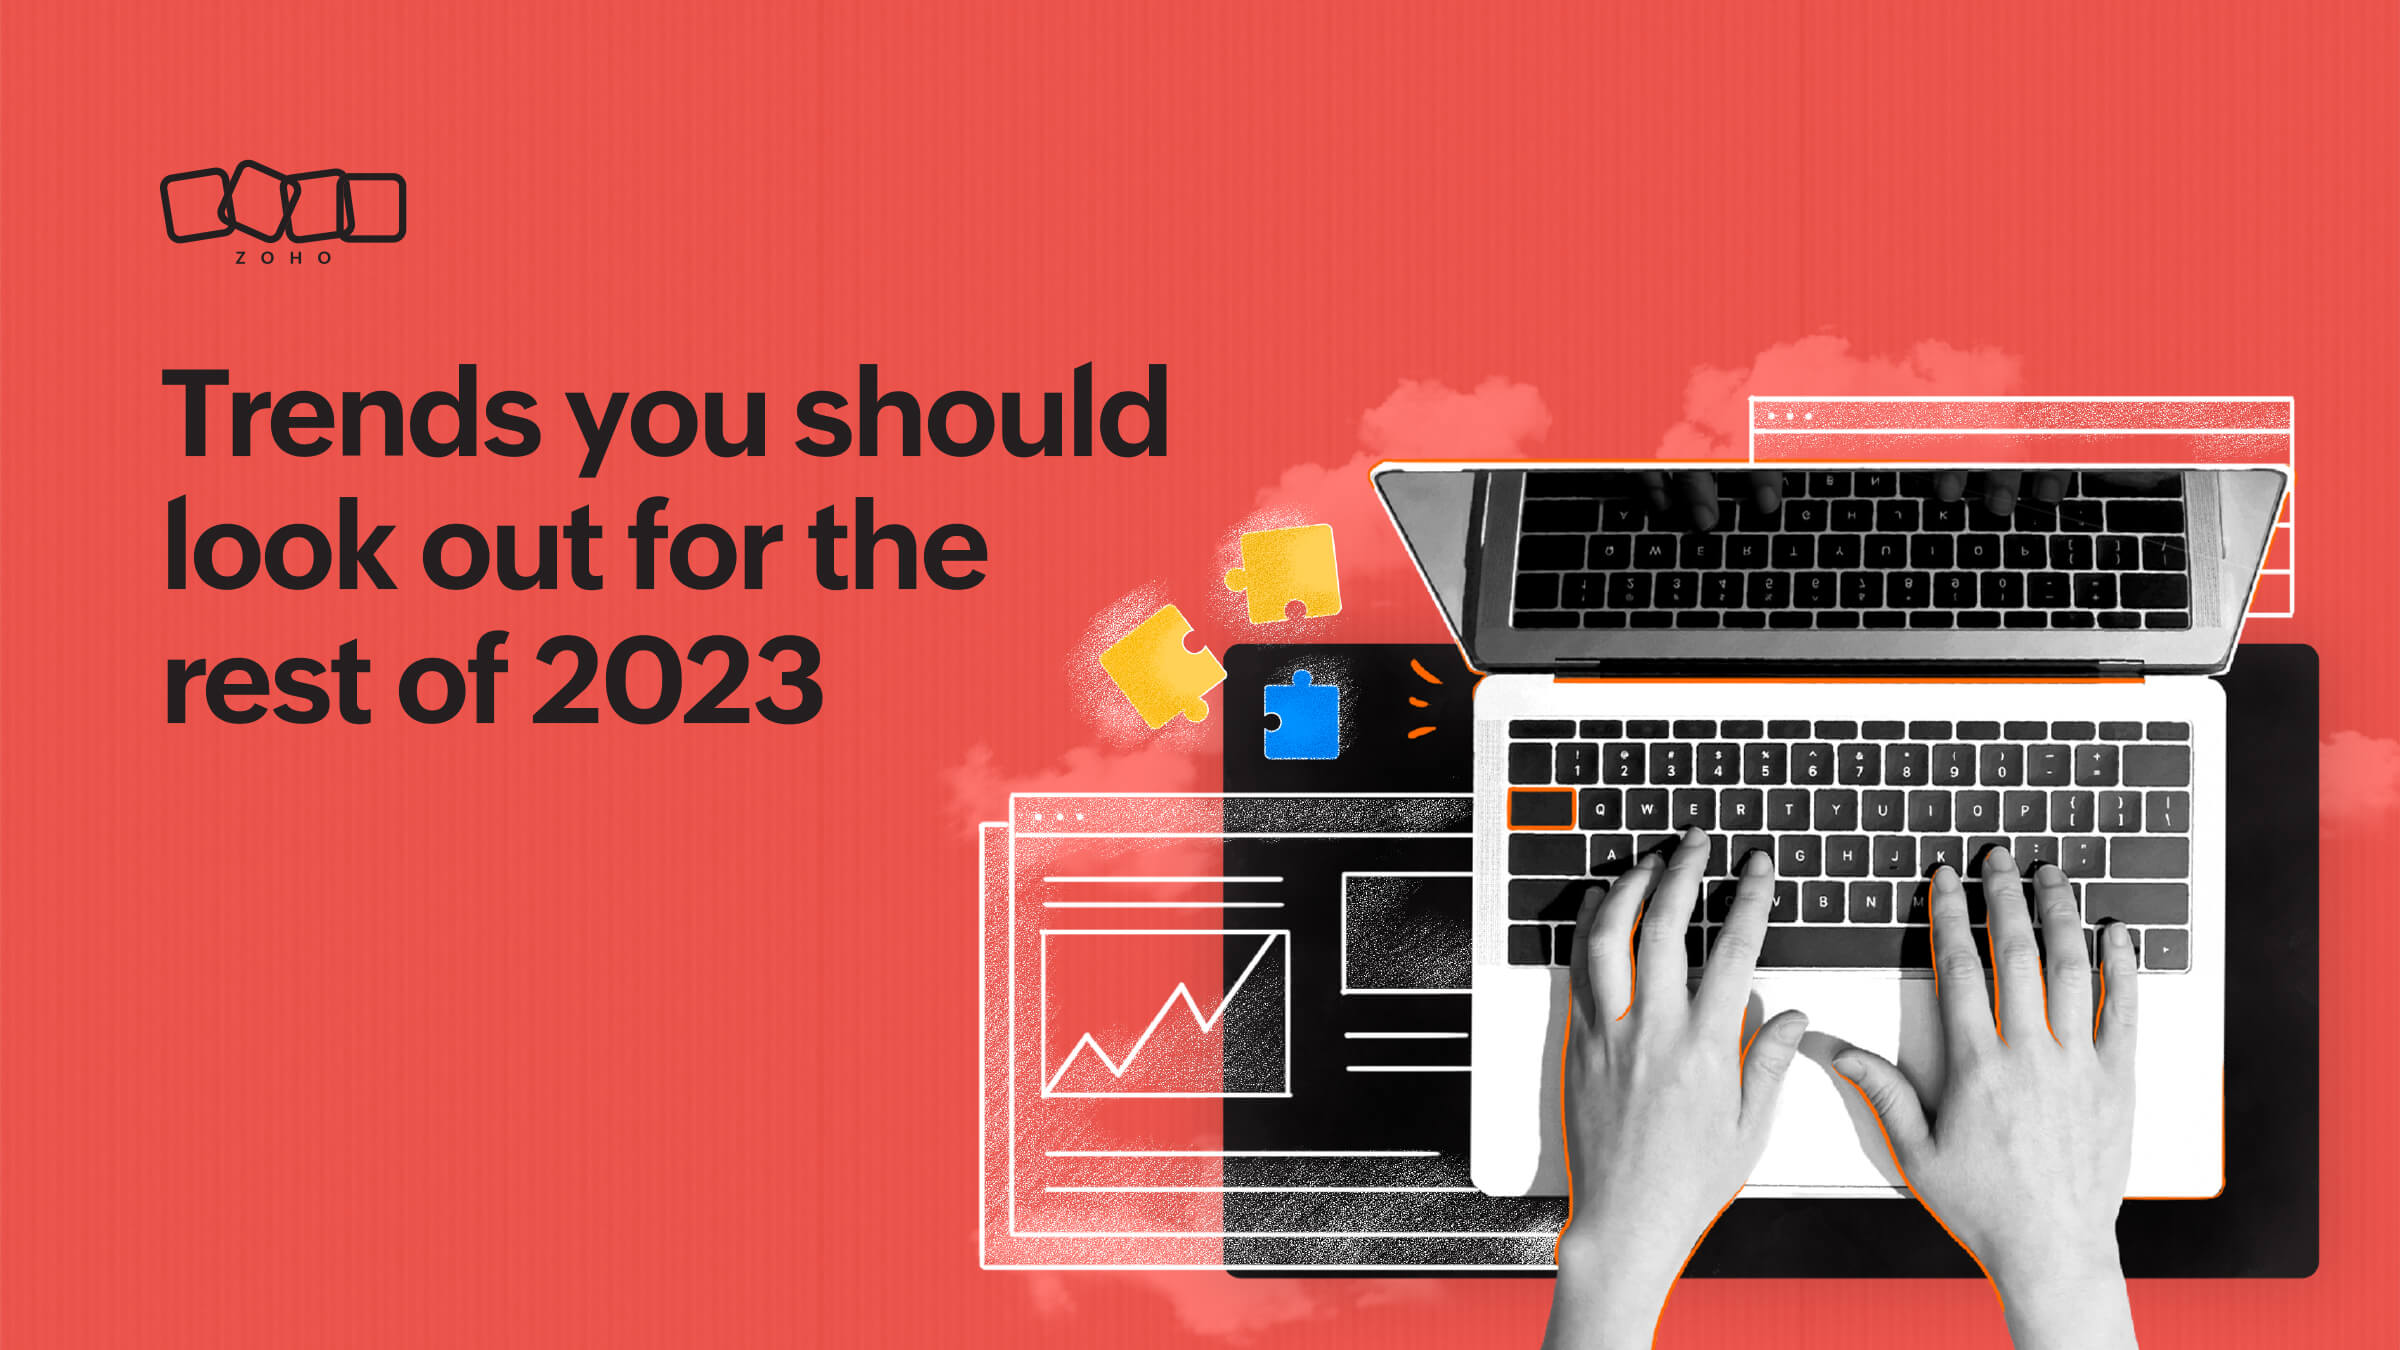 Trends you should look out for the rest of 2023